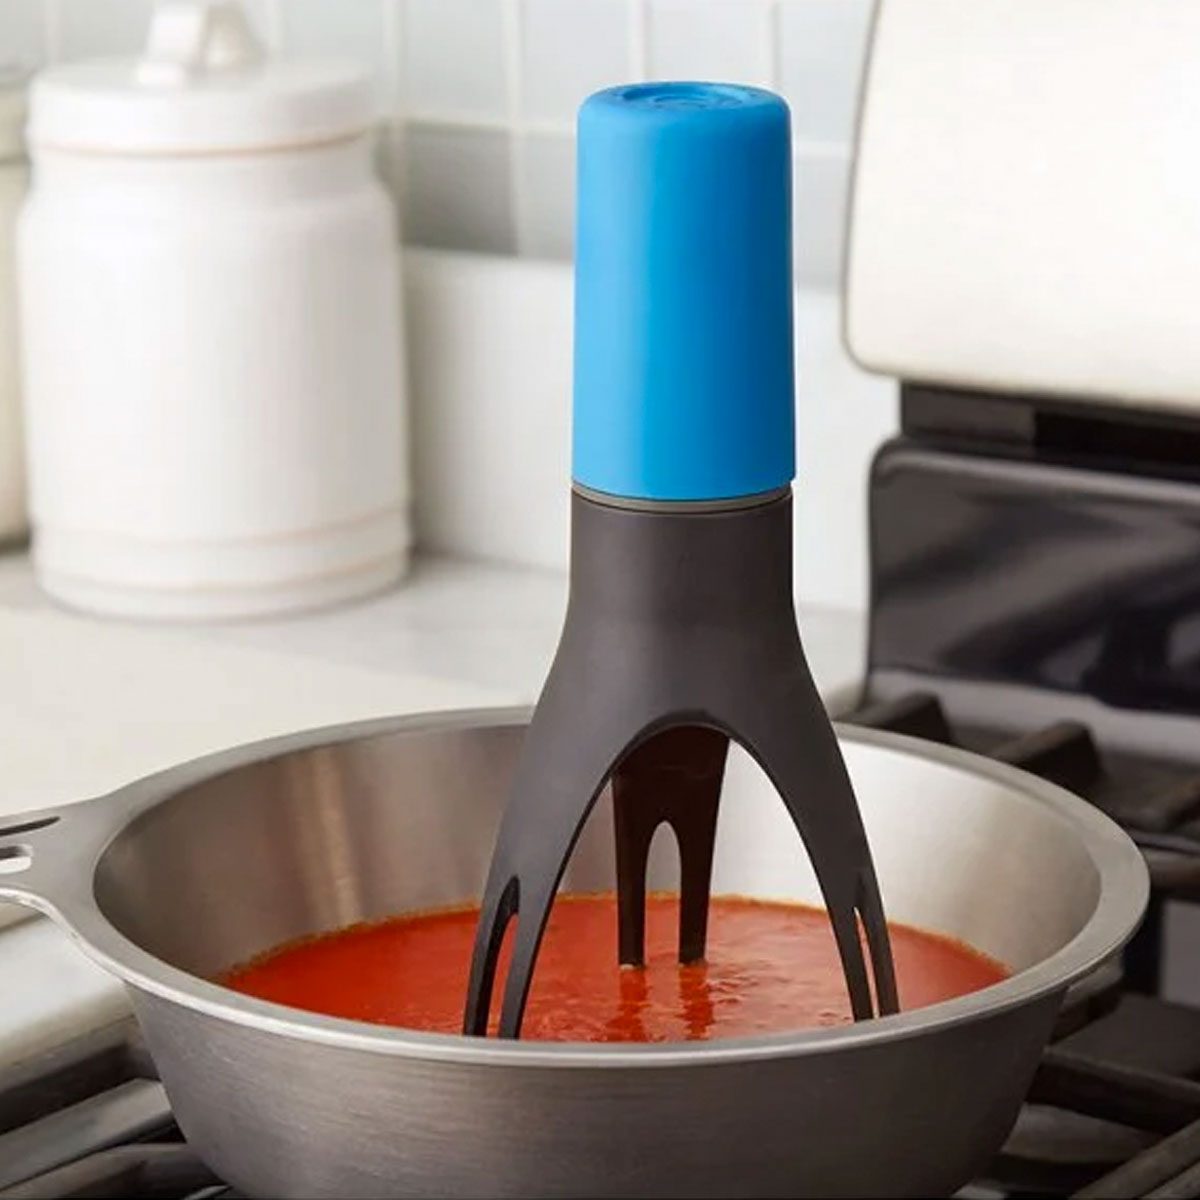 This automatic pot stirrer will help you multitask in the kitchen